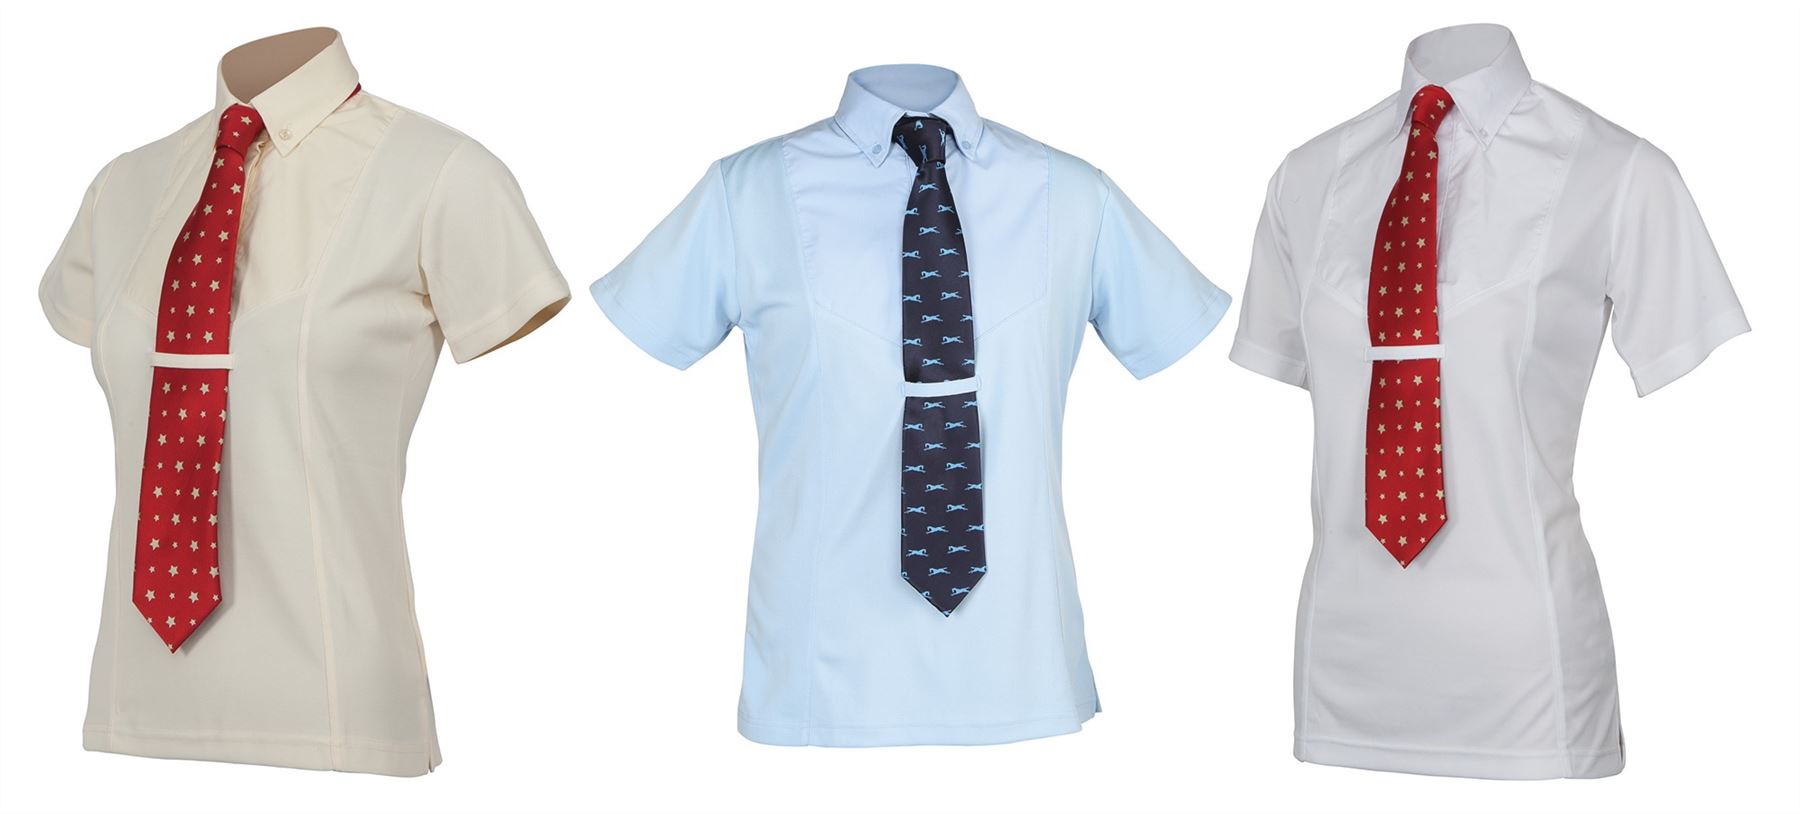 Shires Short Sleeve Tie Shirt - Childrens - Just Horse Riders